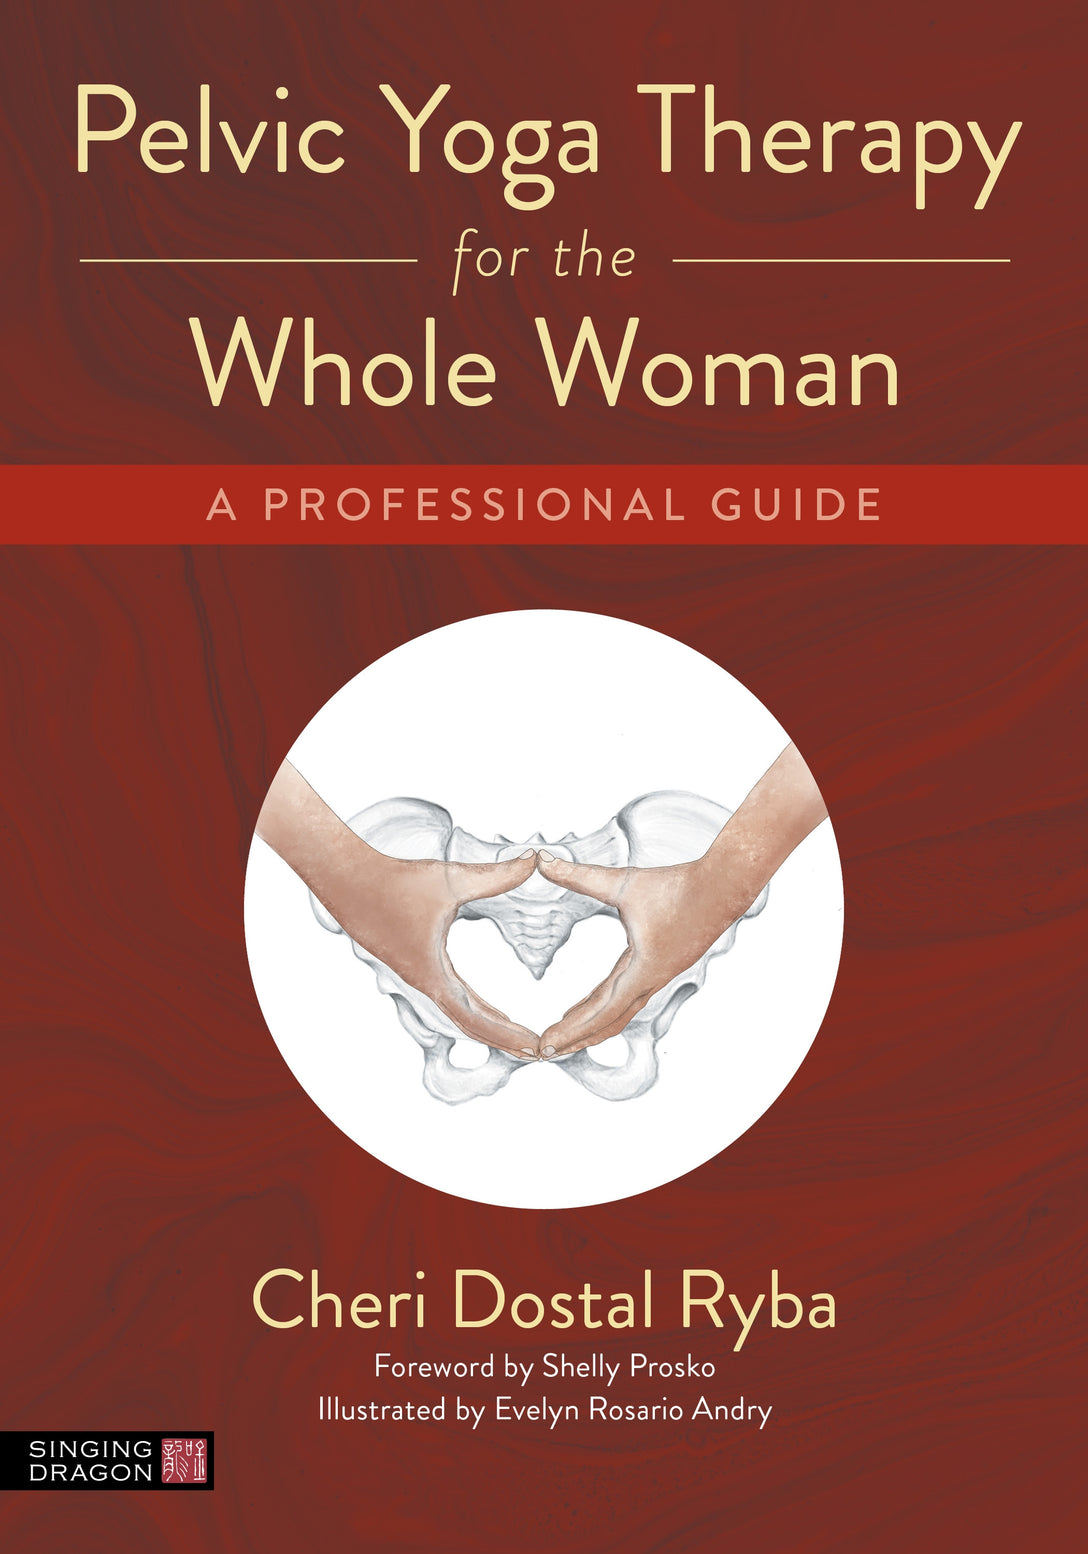 Pelvic Yoga Therapy for the Whole Woman by Cheri Dostal Ryba, Shelly Prosko, Evelyn Rosario Andry